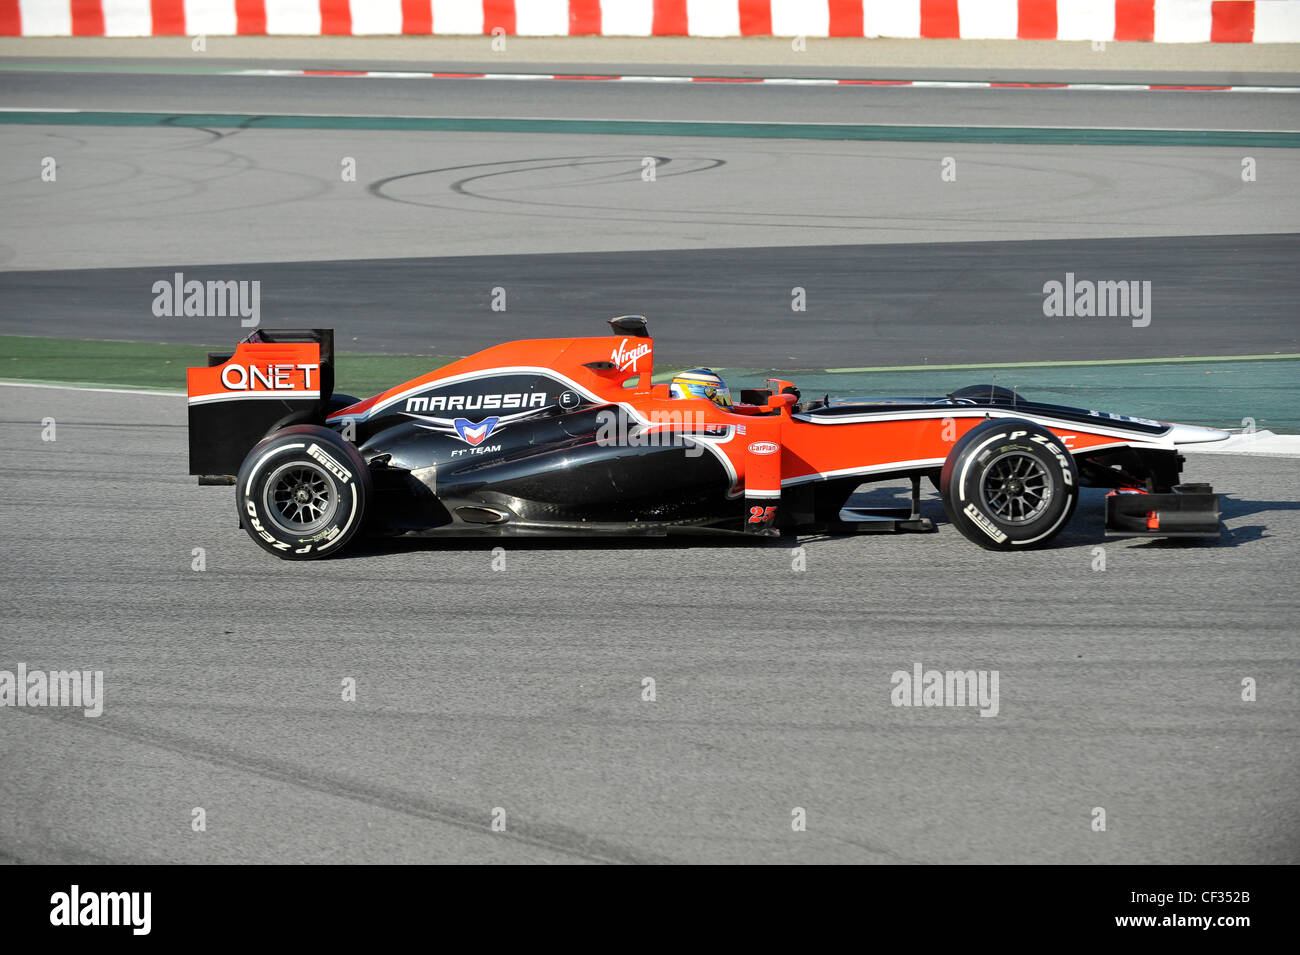 Charles Pic (FRA), Marussia während Formel1 Tests Sessions am Circuito Katalonien, Spanien Stockfoto